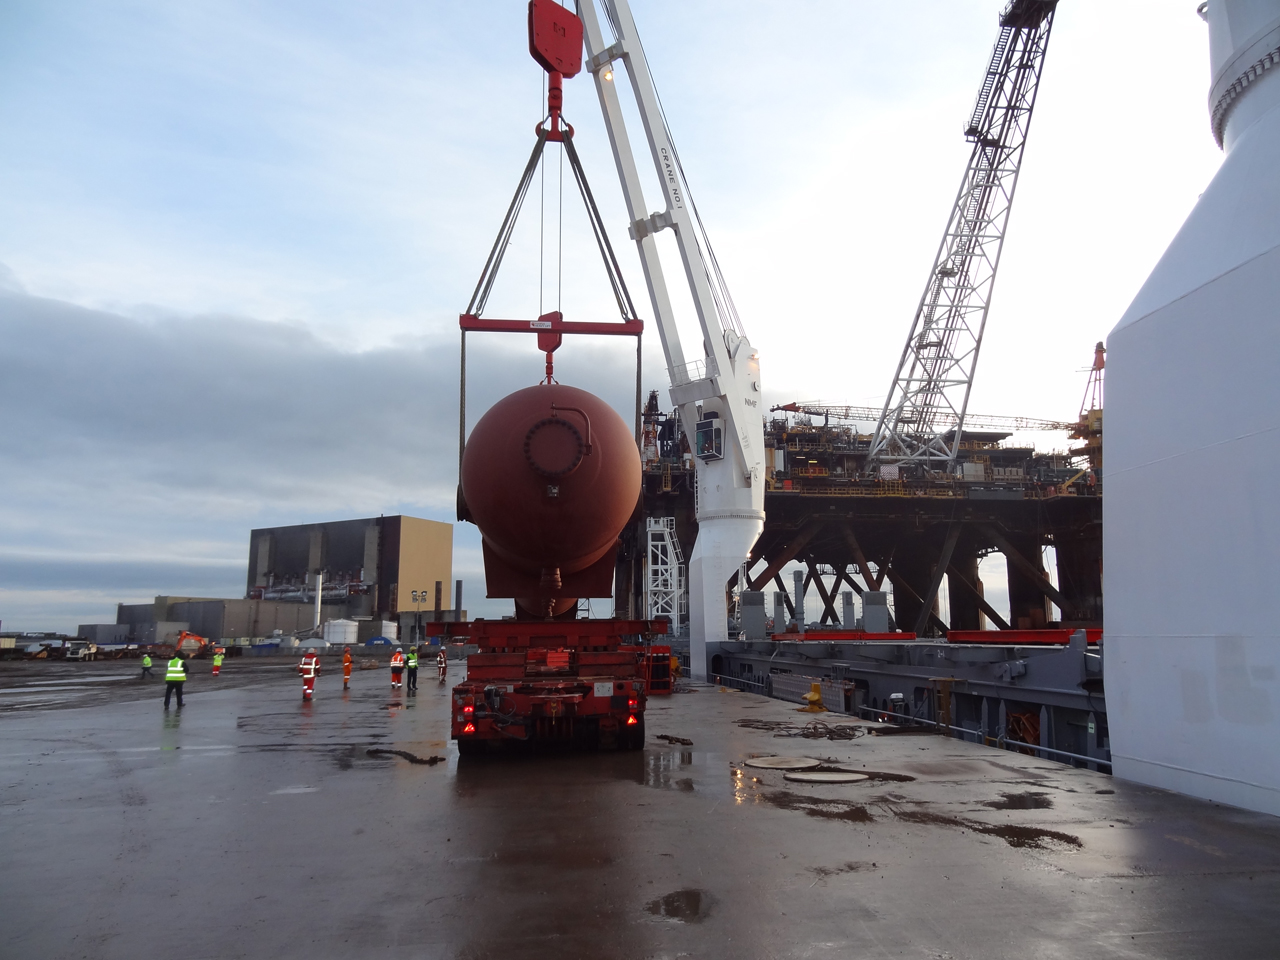 Pipeline Equipment Shipped to Able Seaton Port